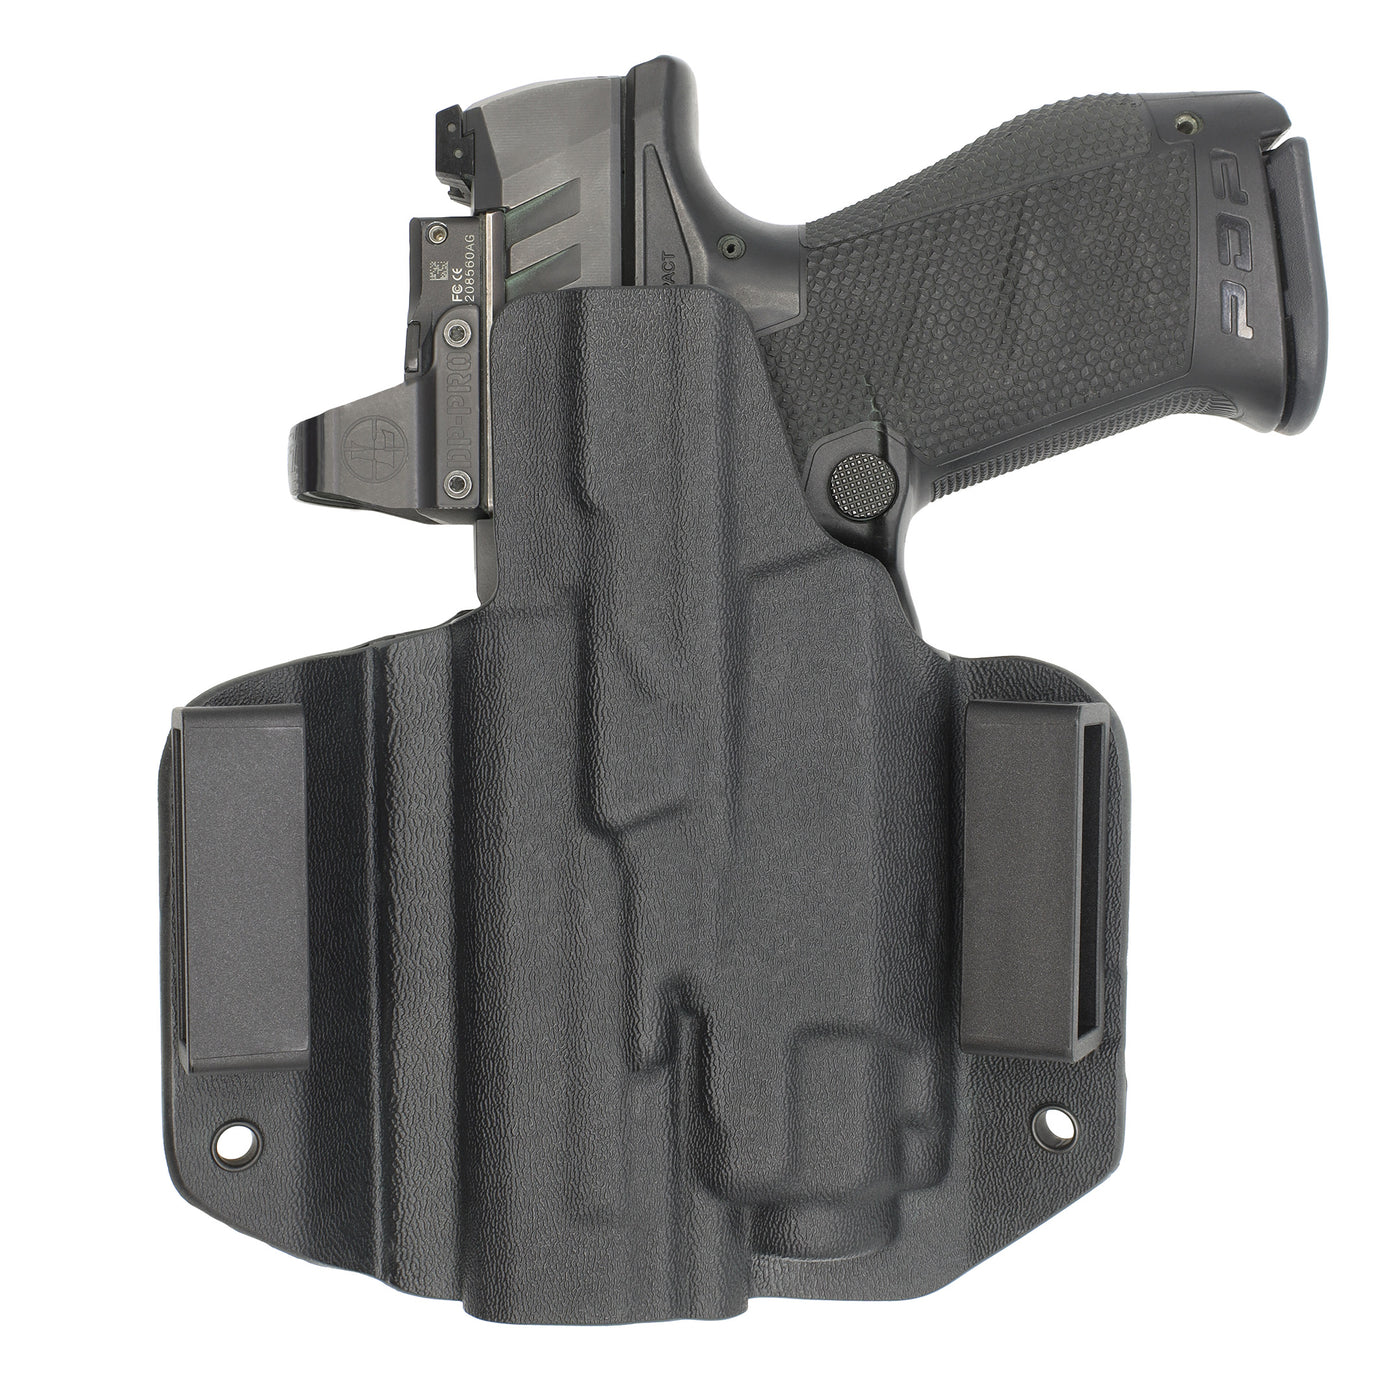 C&G Holsters quickship OWB tactical M&P 10/45 streamlight TLR8 holstered back view